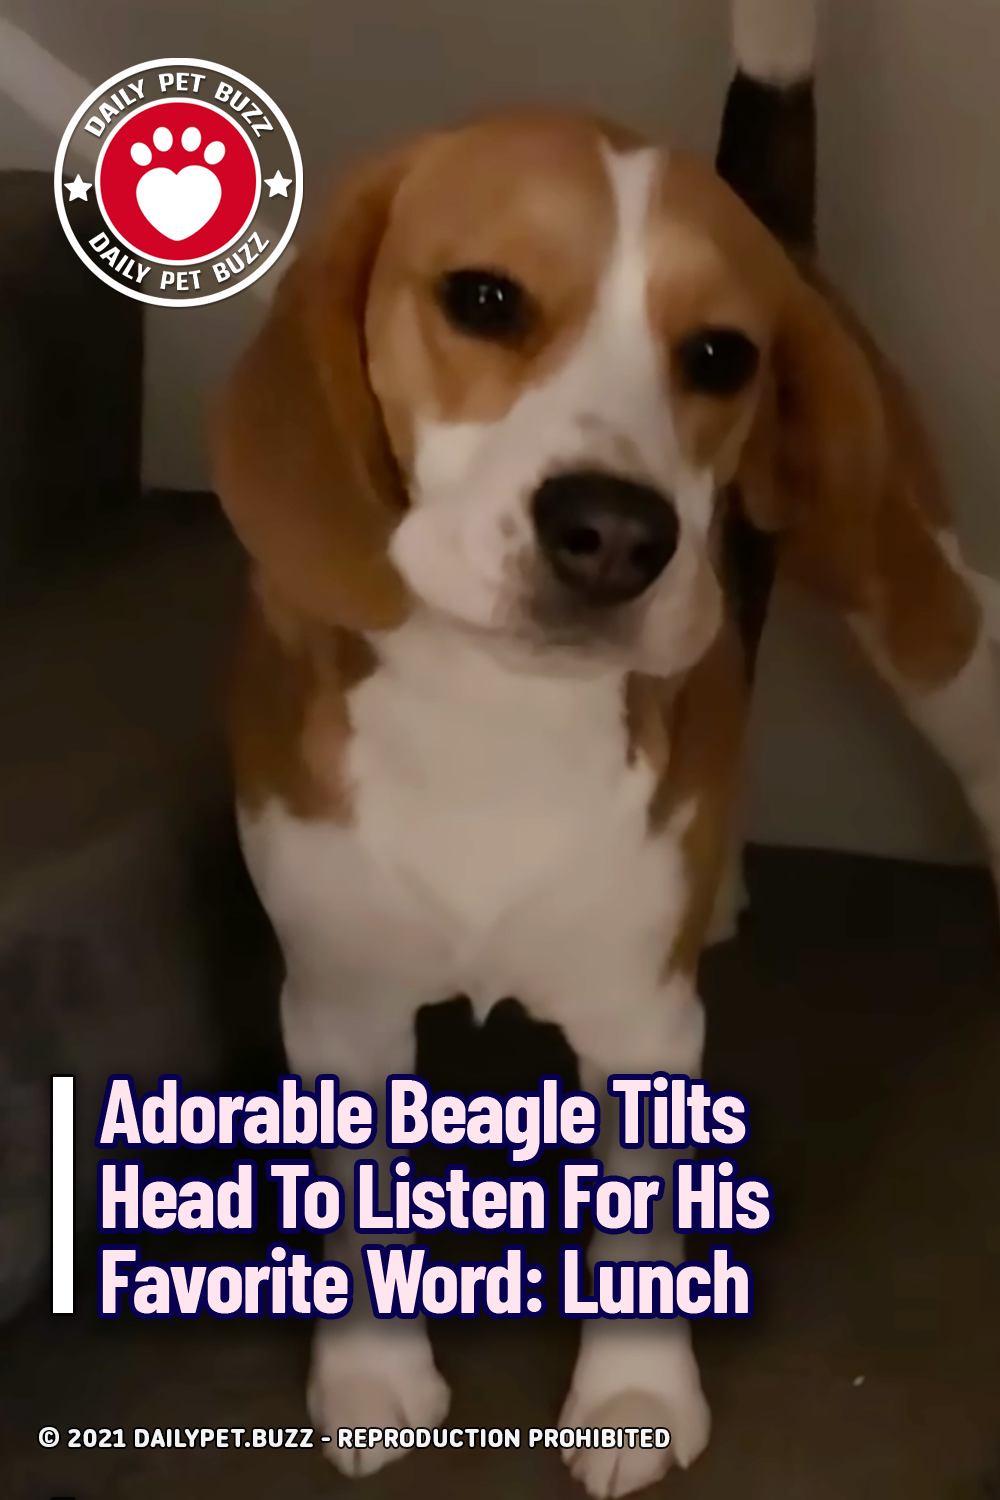 Adorable Beagle Tilts Head To Listen For His Favorite Word: Lunch